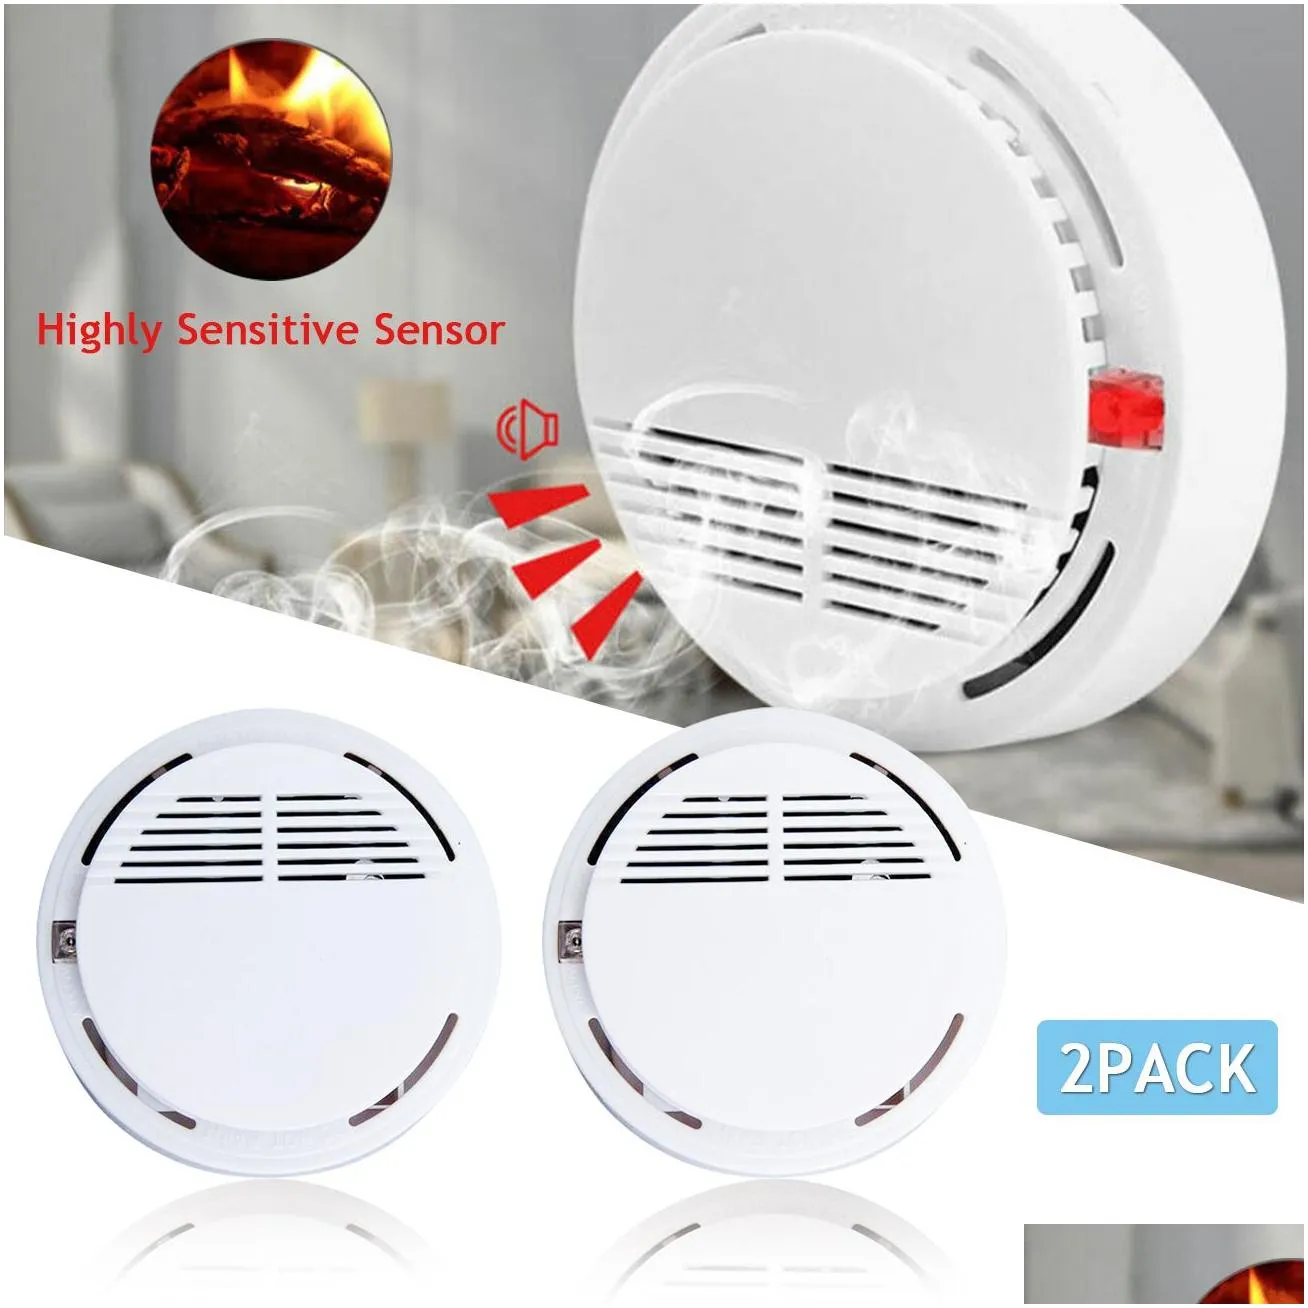 Alarm Accessories 2Pcs Smoke Detector Fire Sentry Alarm Safety 9V Battery Operated Included Drop Delivery Security Surveillance Securi Dhrbt